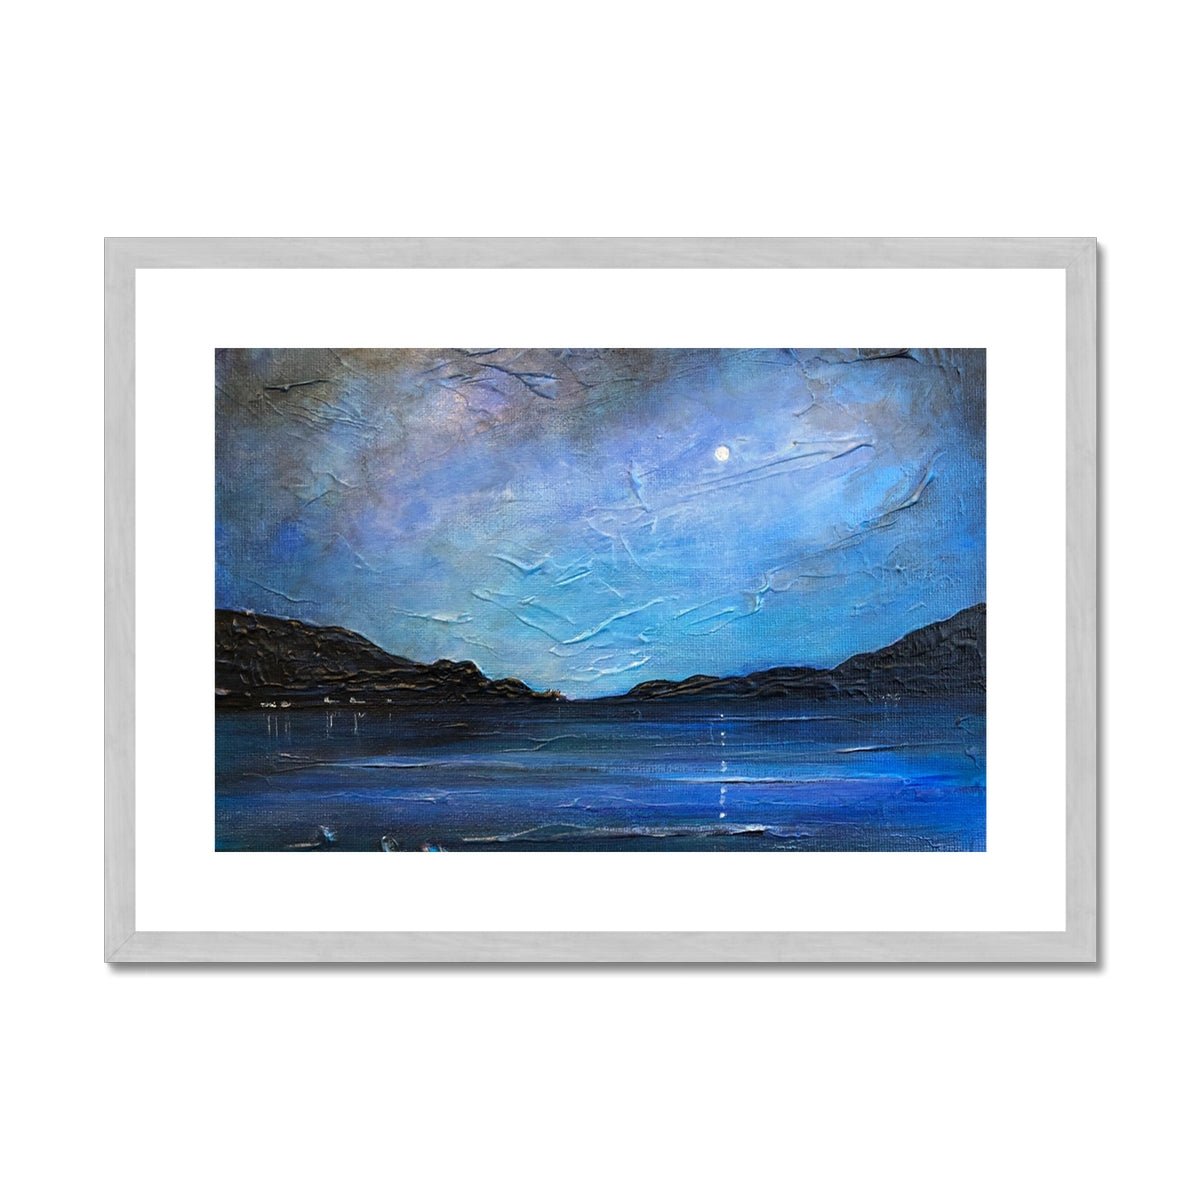 Loch Ness Moonlight Painting | Antique Framed & Mounted Prints From Scotland-Antique Framed & Mounted Prints-Scottish Lochs & Mountains Art Gallery-A2 Landscape-Silver Frame-Paintings, Prints, Homeware, Art Gifts From Scotland By Scottish Artist Kevin Hunter